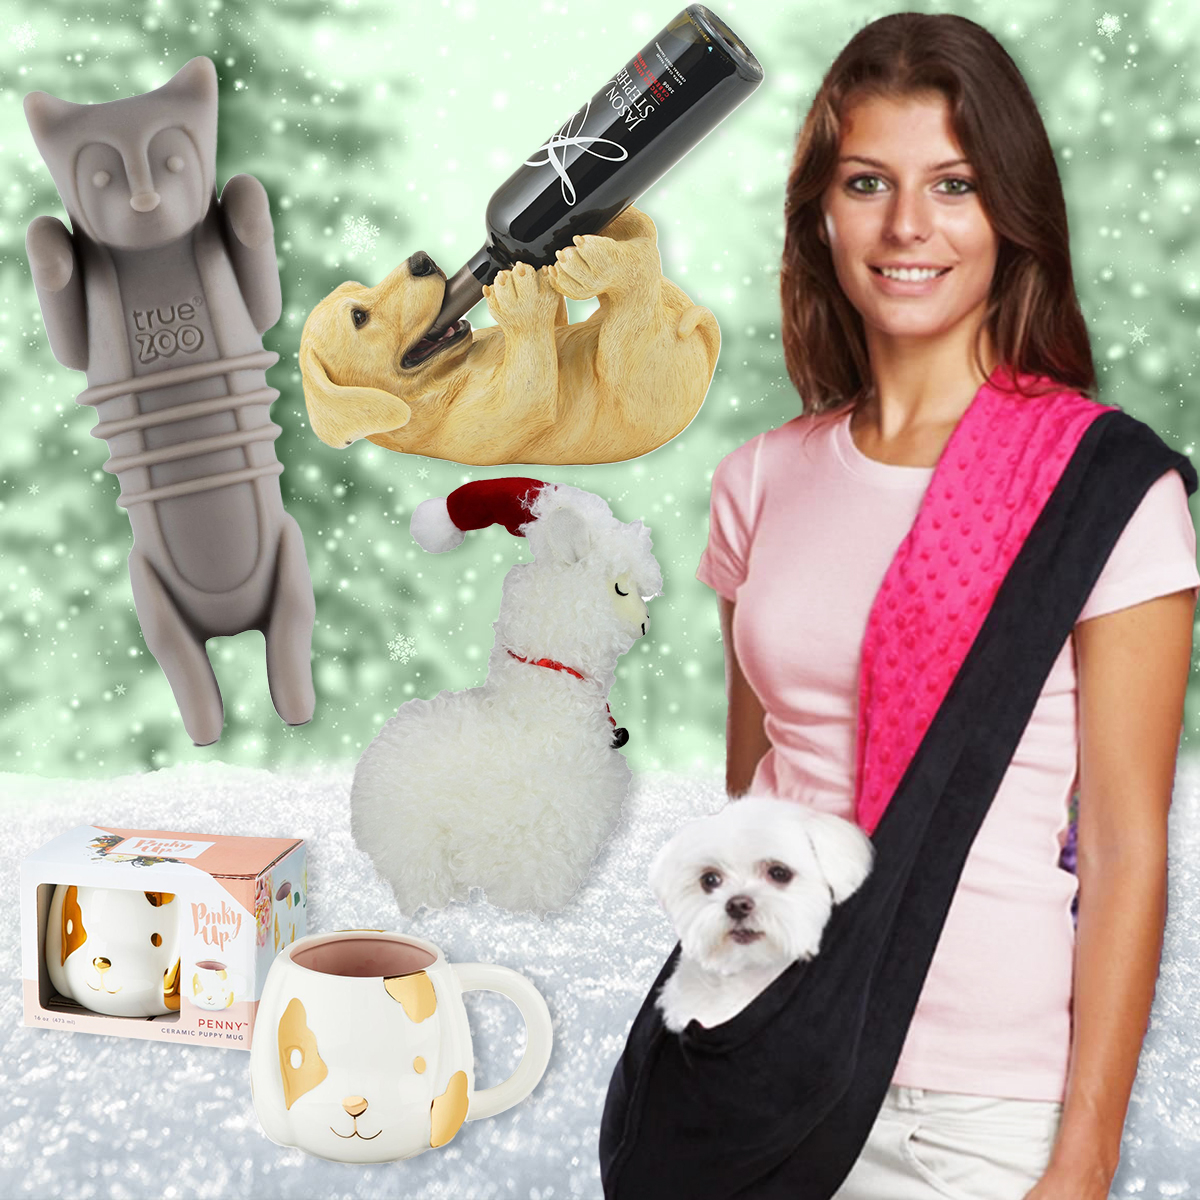 14 Best Pet Gifts—Gifts for Dog & Cat Lovers - Parade Pets